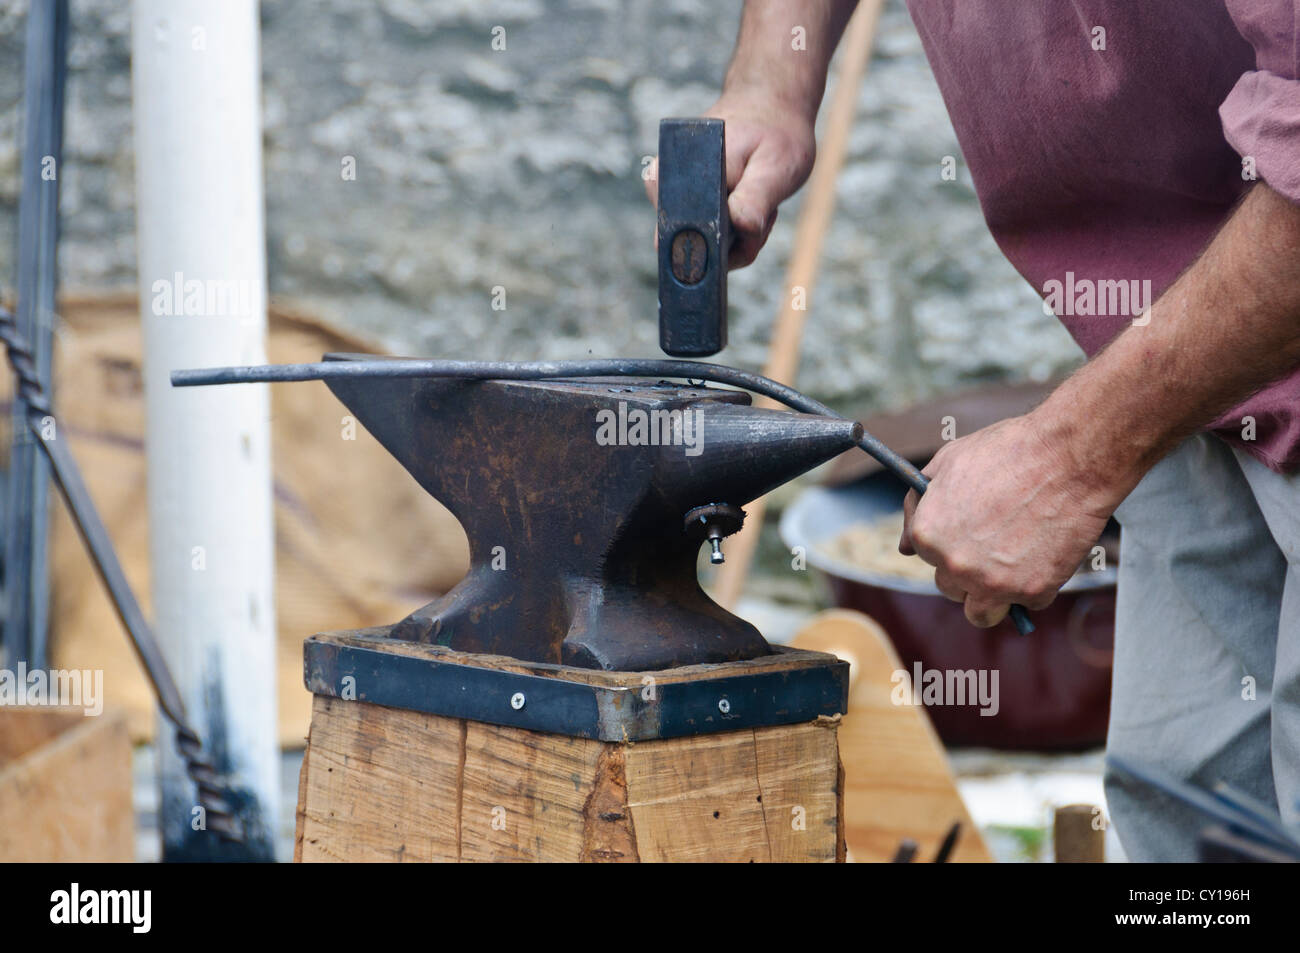 Farrier with sledgehammer in motion blur smashes with full active force at a red-hot iron rod workpiece on an blacksmith anvil Stock Photo